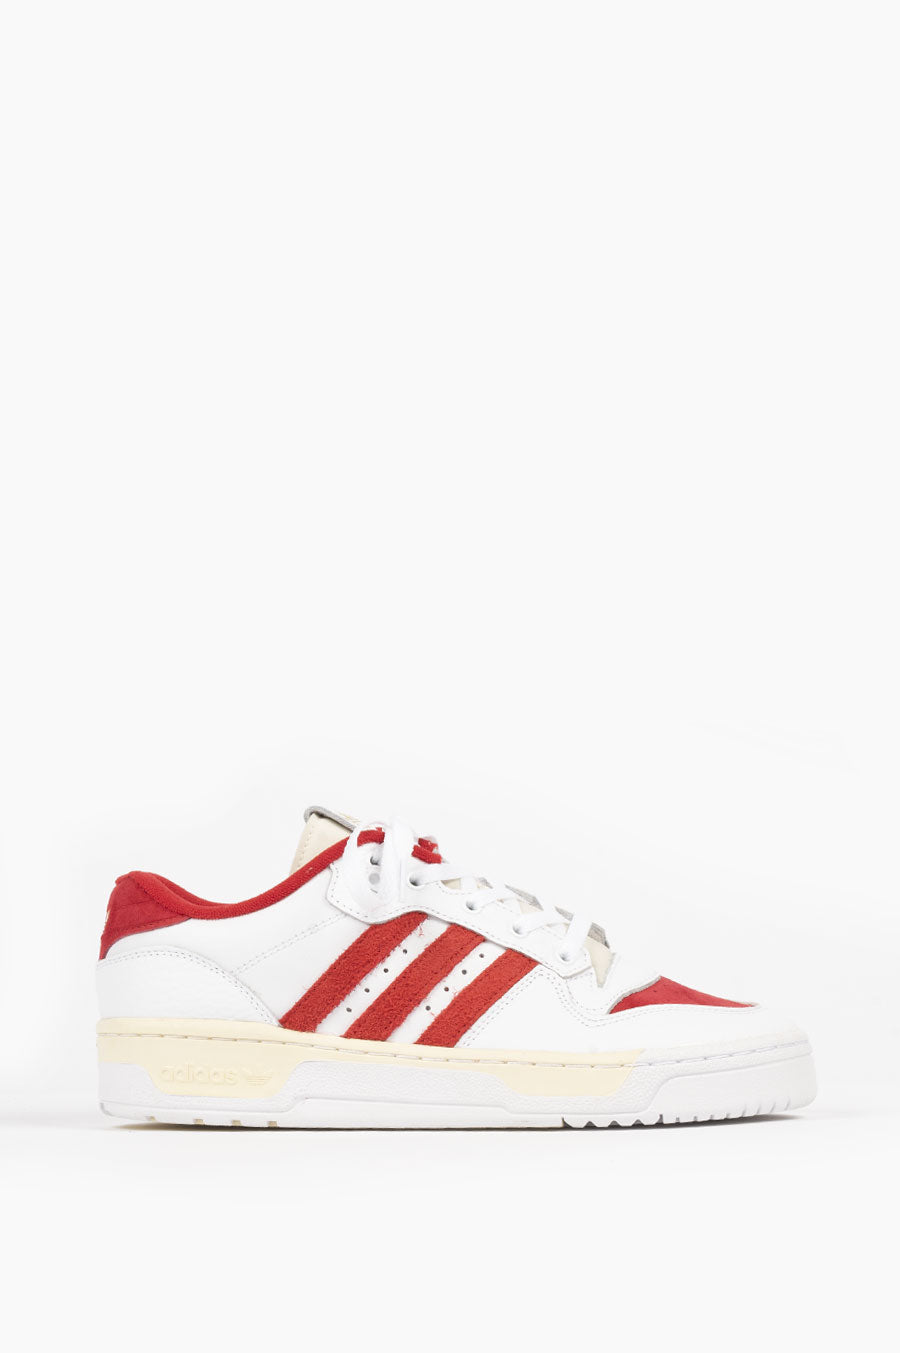 ADIDAS RIVALRY LOW PREMIUM WHITE SCARLET – BLENDS